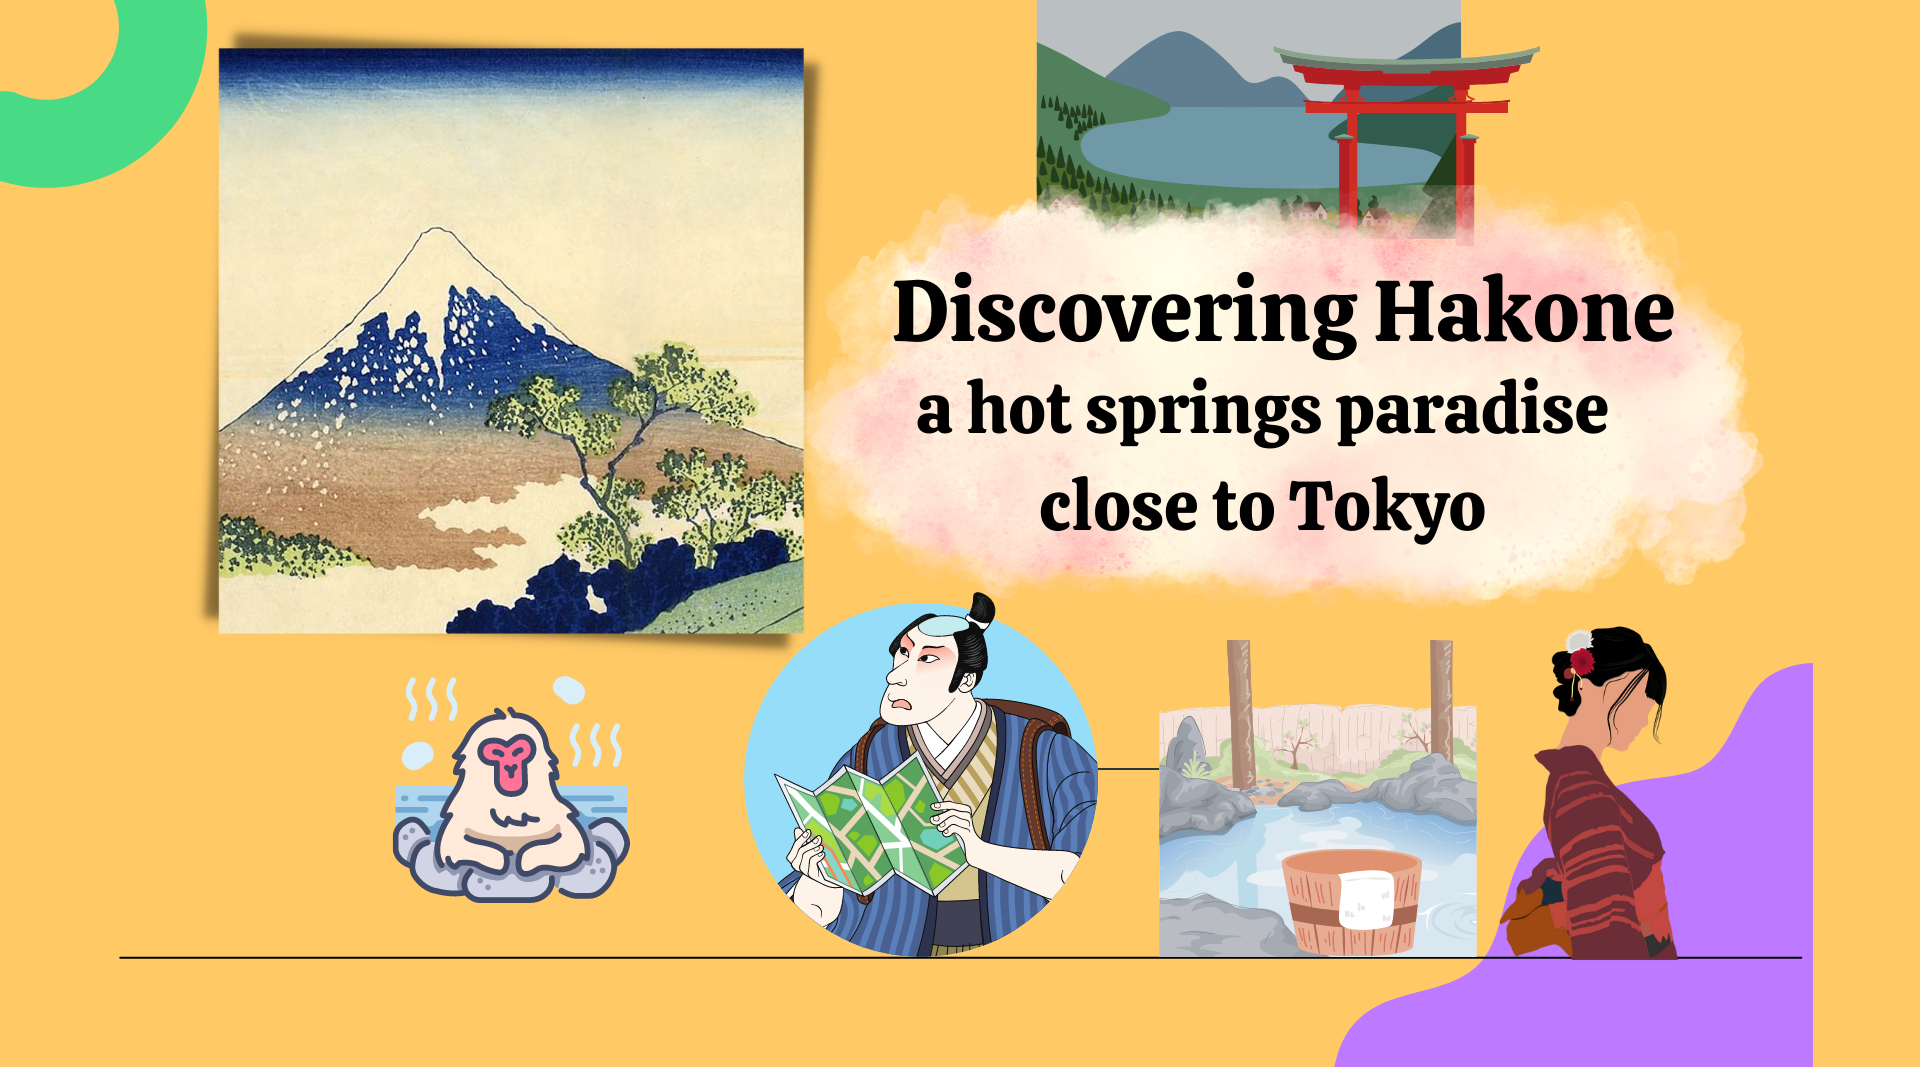 Discovering Hakone: a hot springs paradise close to Tokyo